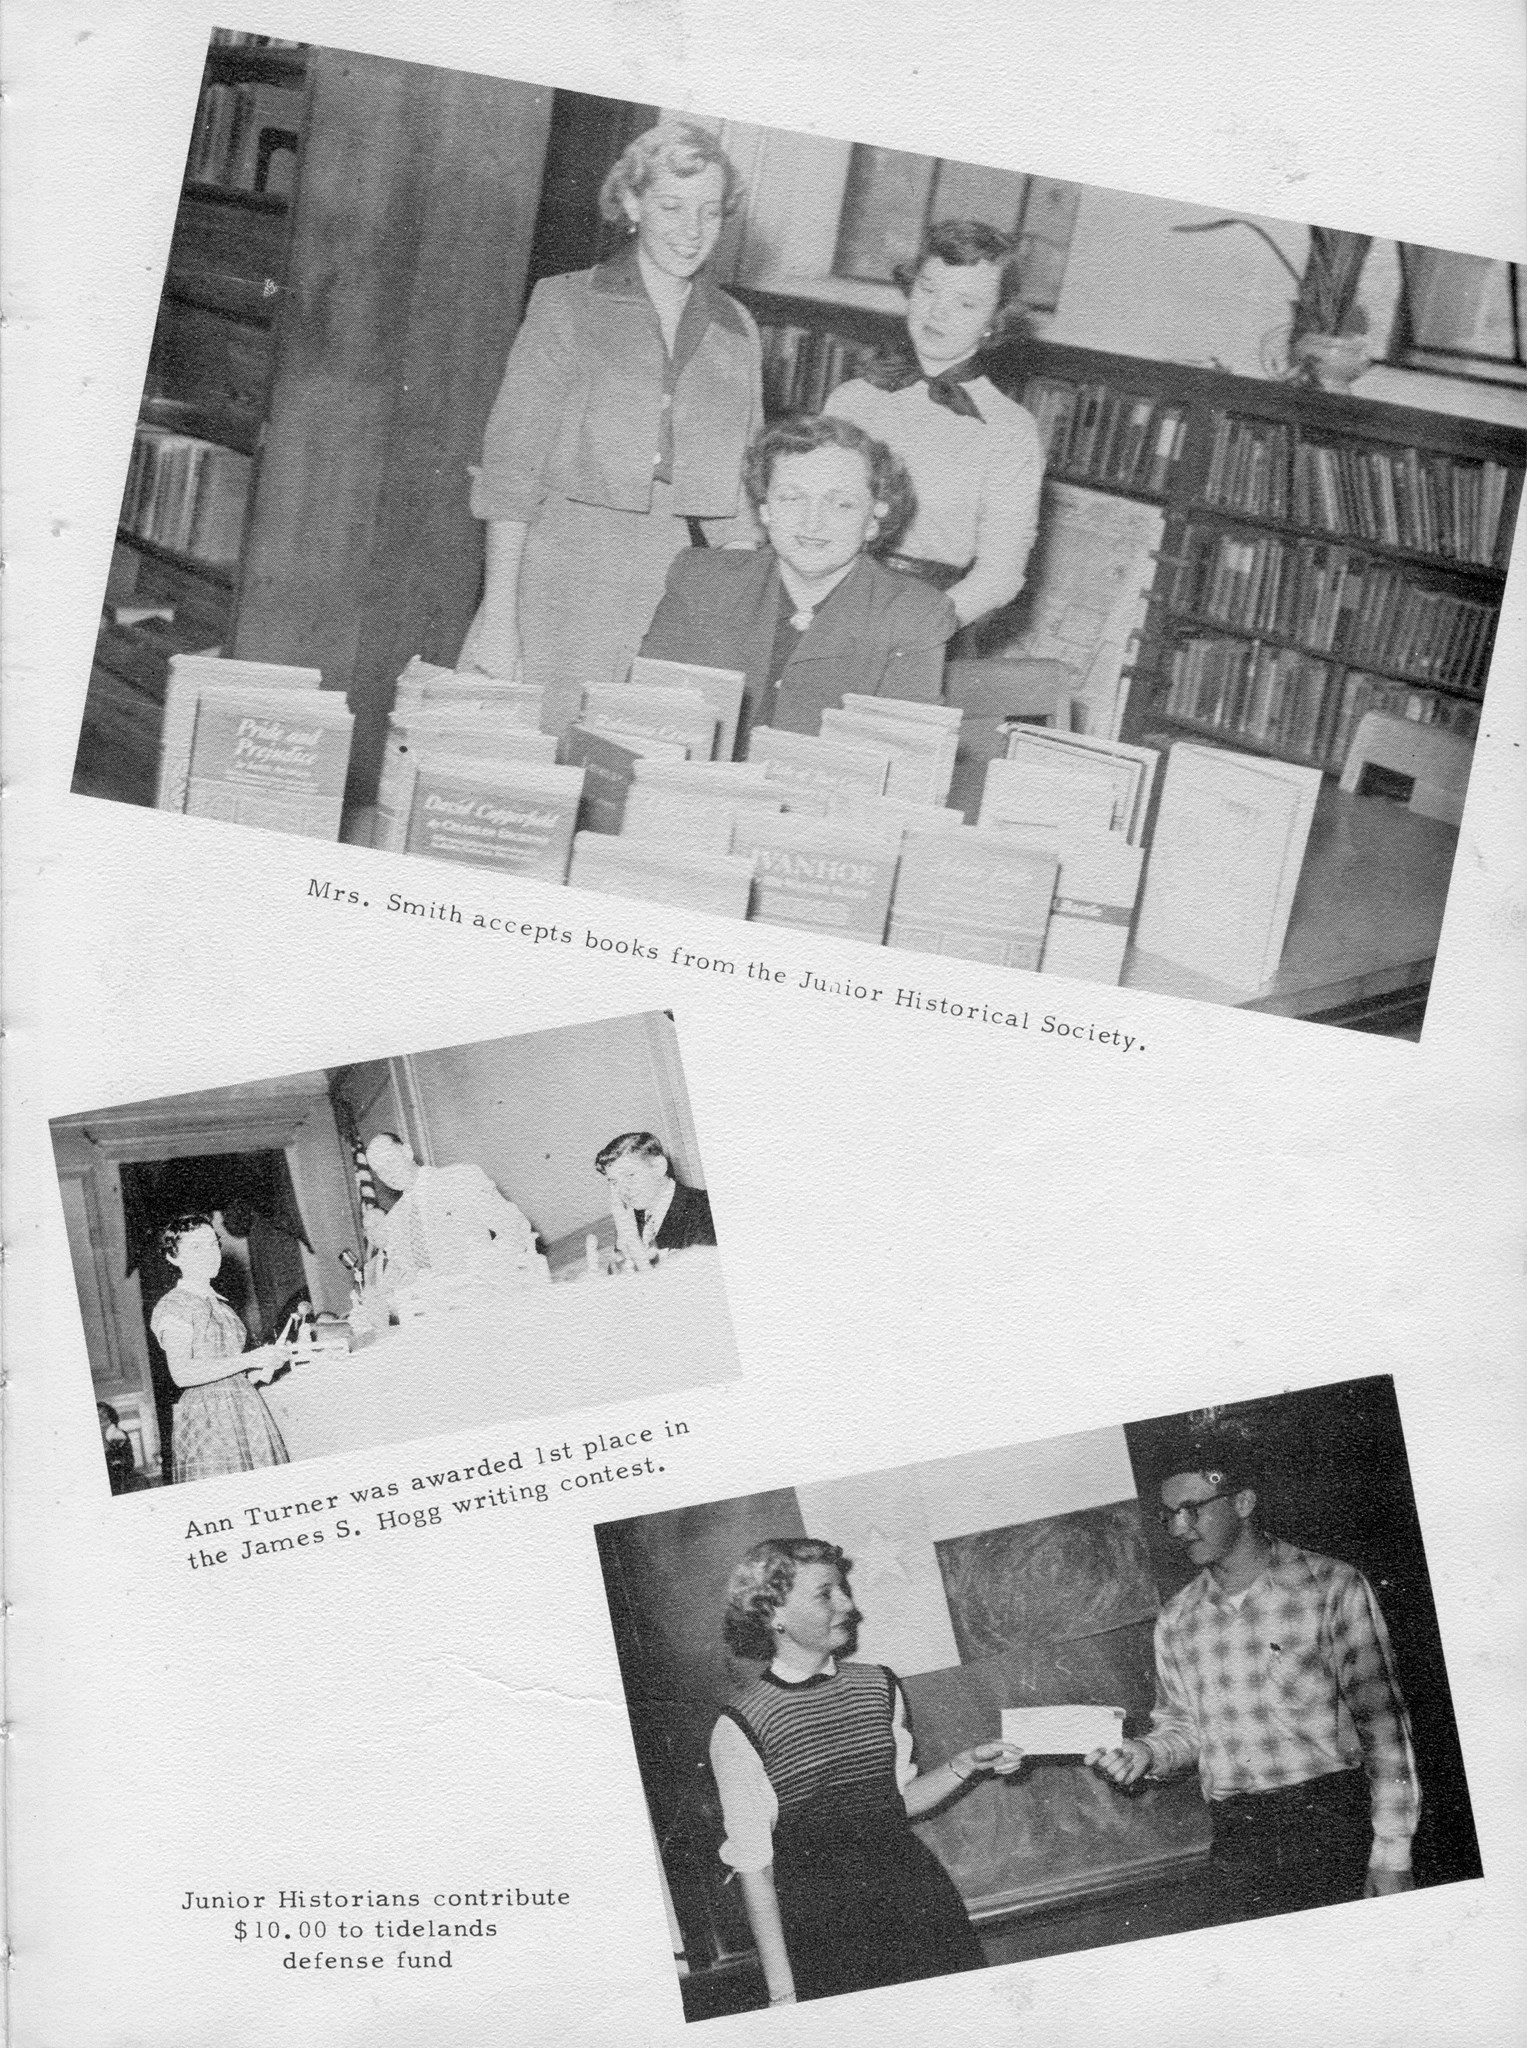 ../../../Images/Large/1952/Arclight-1952-pg0057.jpg